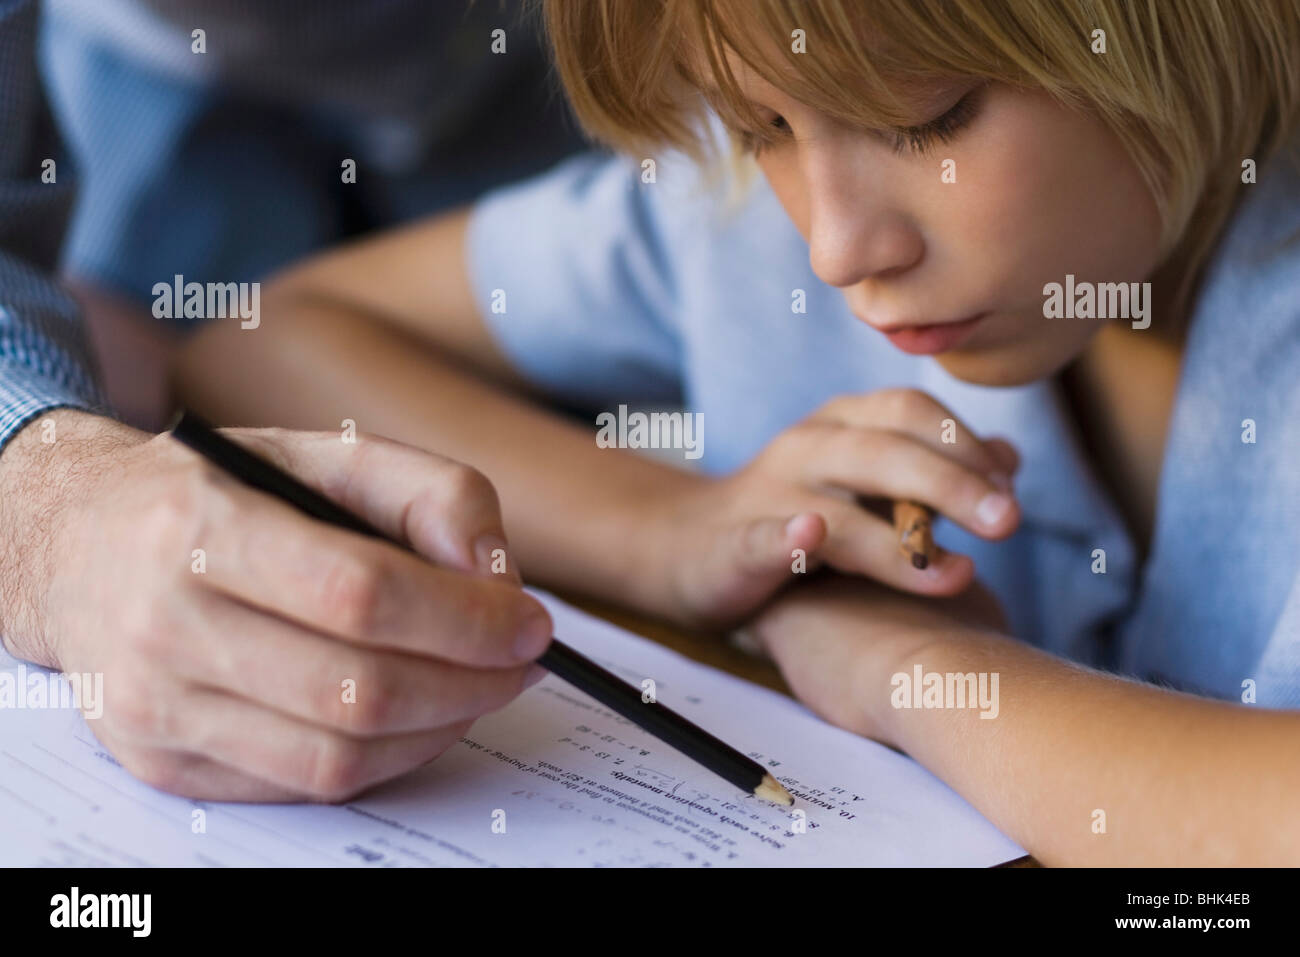 Elementary school student being helped by teacher in class Stock Photo